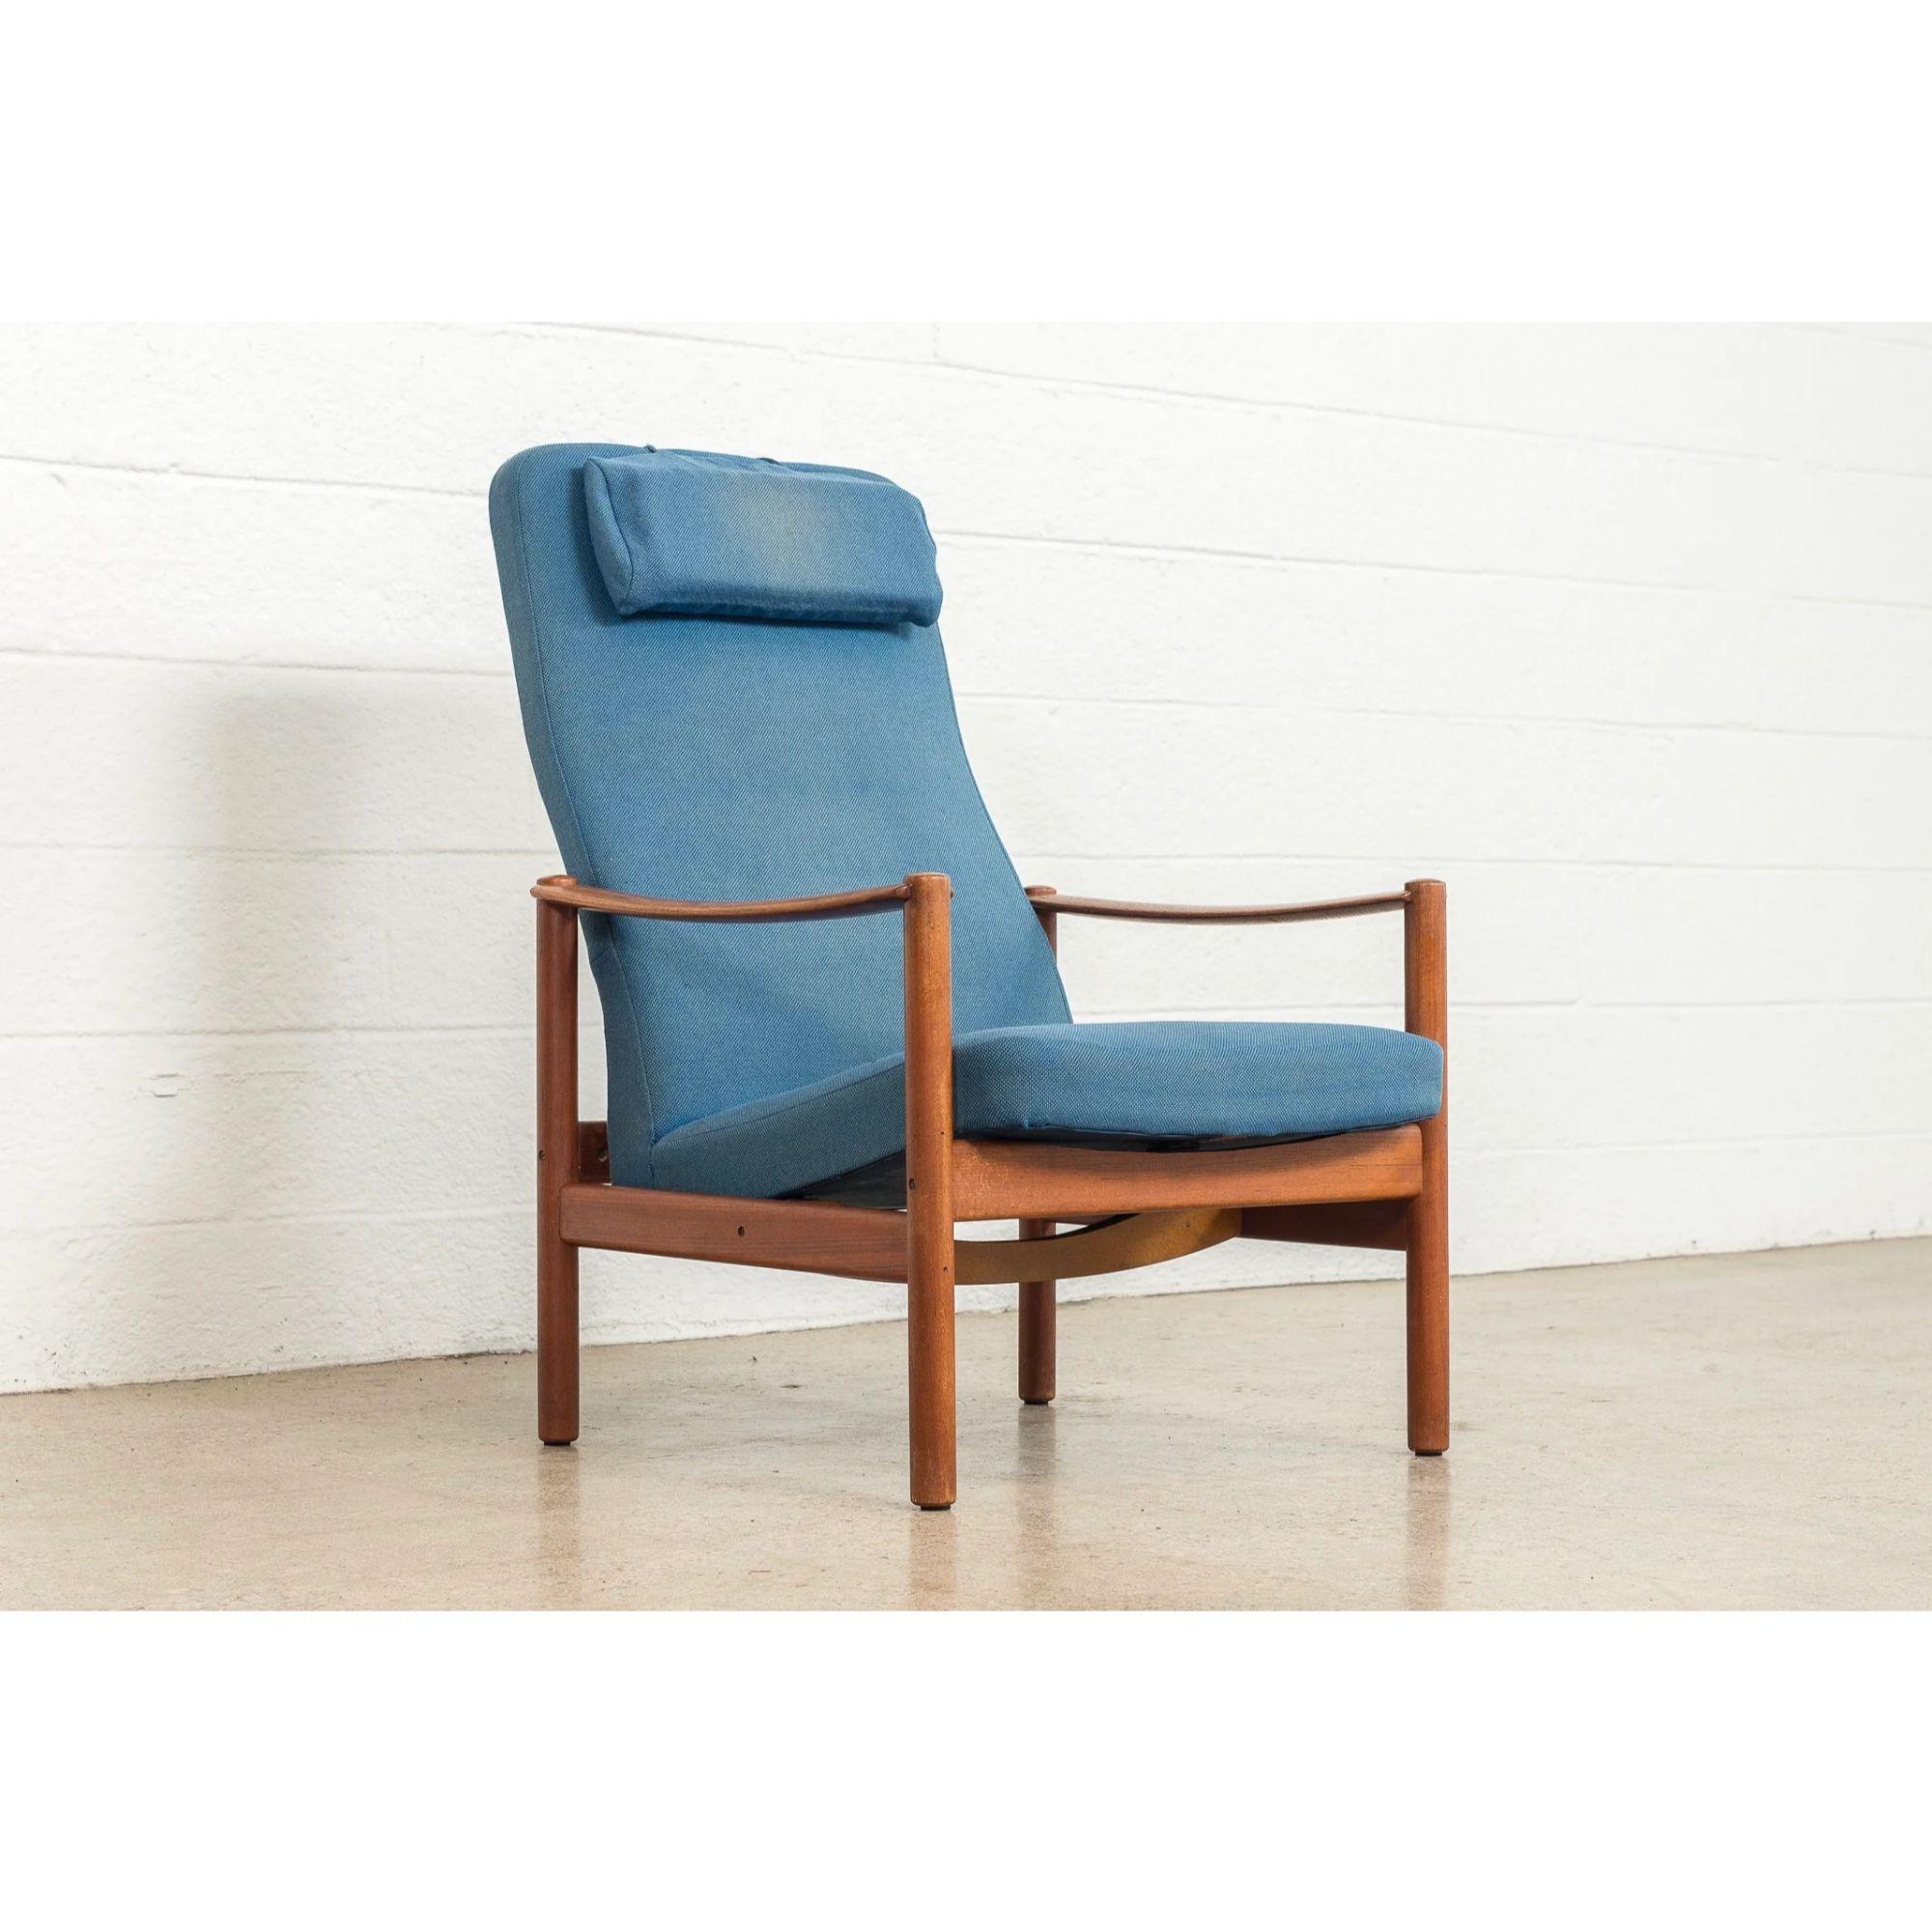 This vintage mid century Swedish modern Folke Ohlsson for DUX style reclining high-back lounge chair is circa 1960. This well-built chair features a minimalist Scandinavian modern design with clean lines and elegant curves. The solid teak wood frame